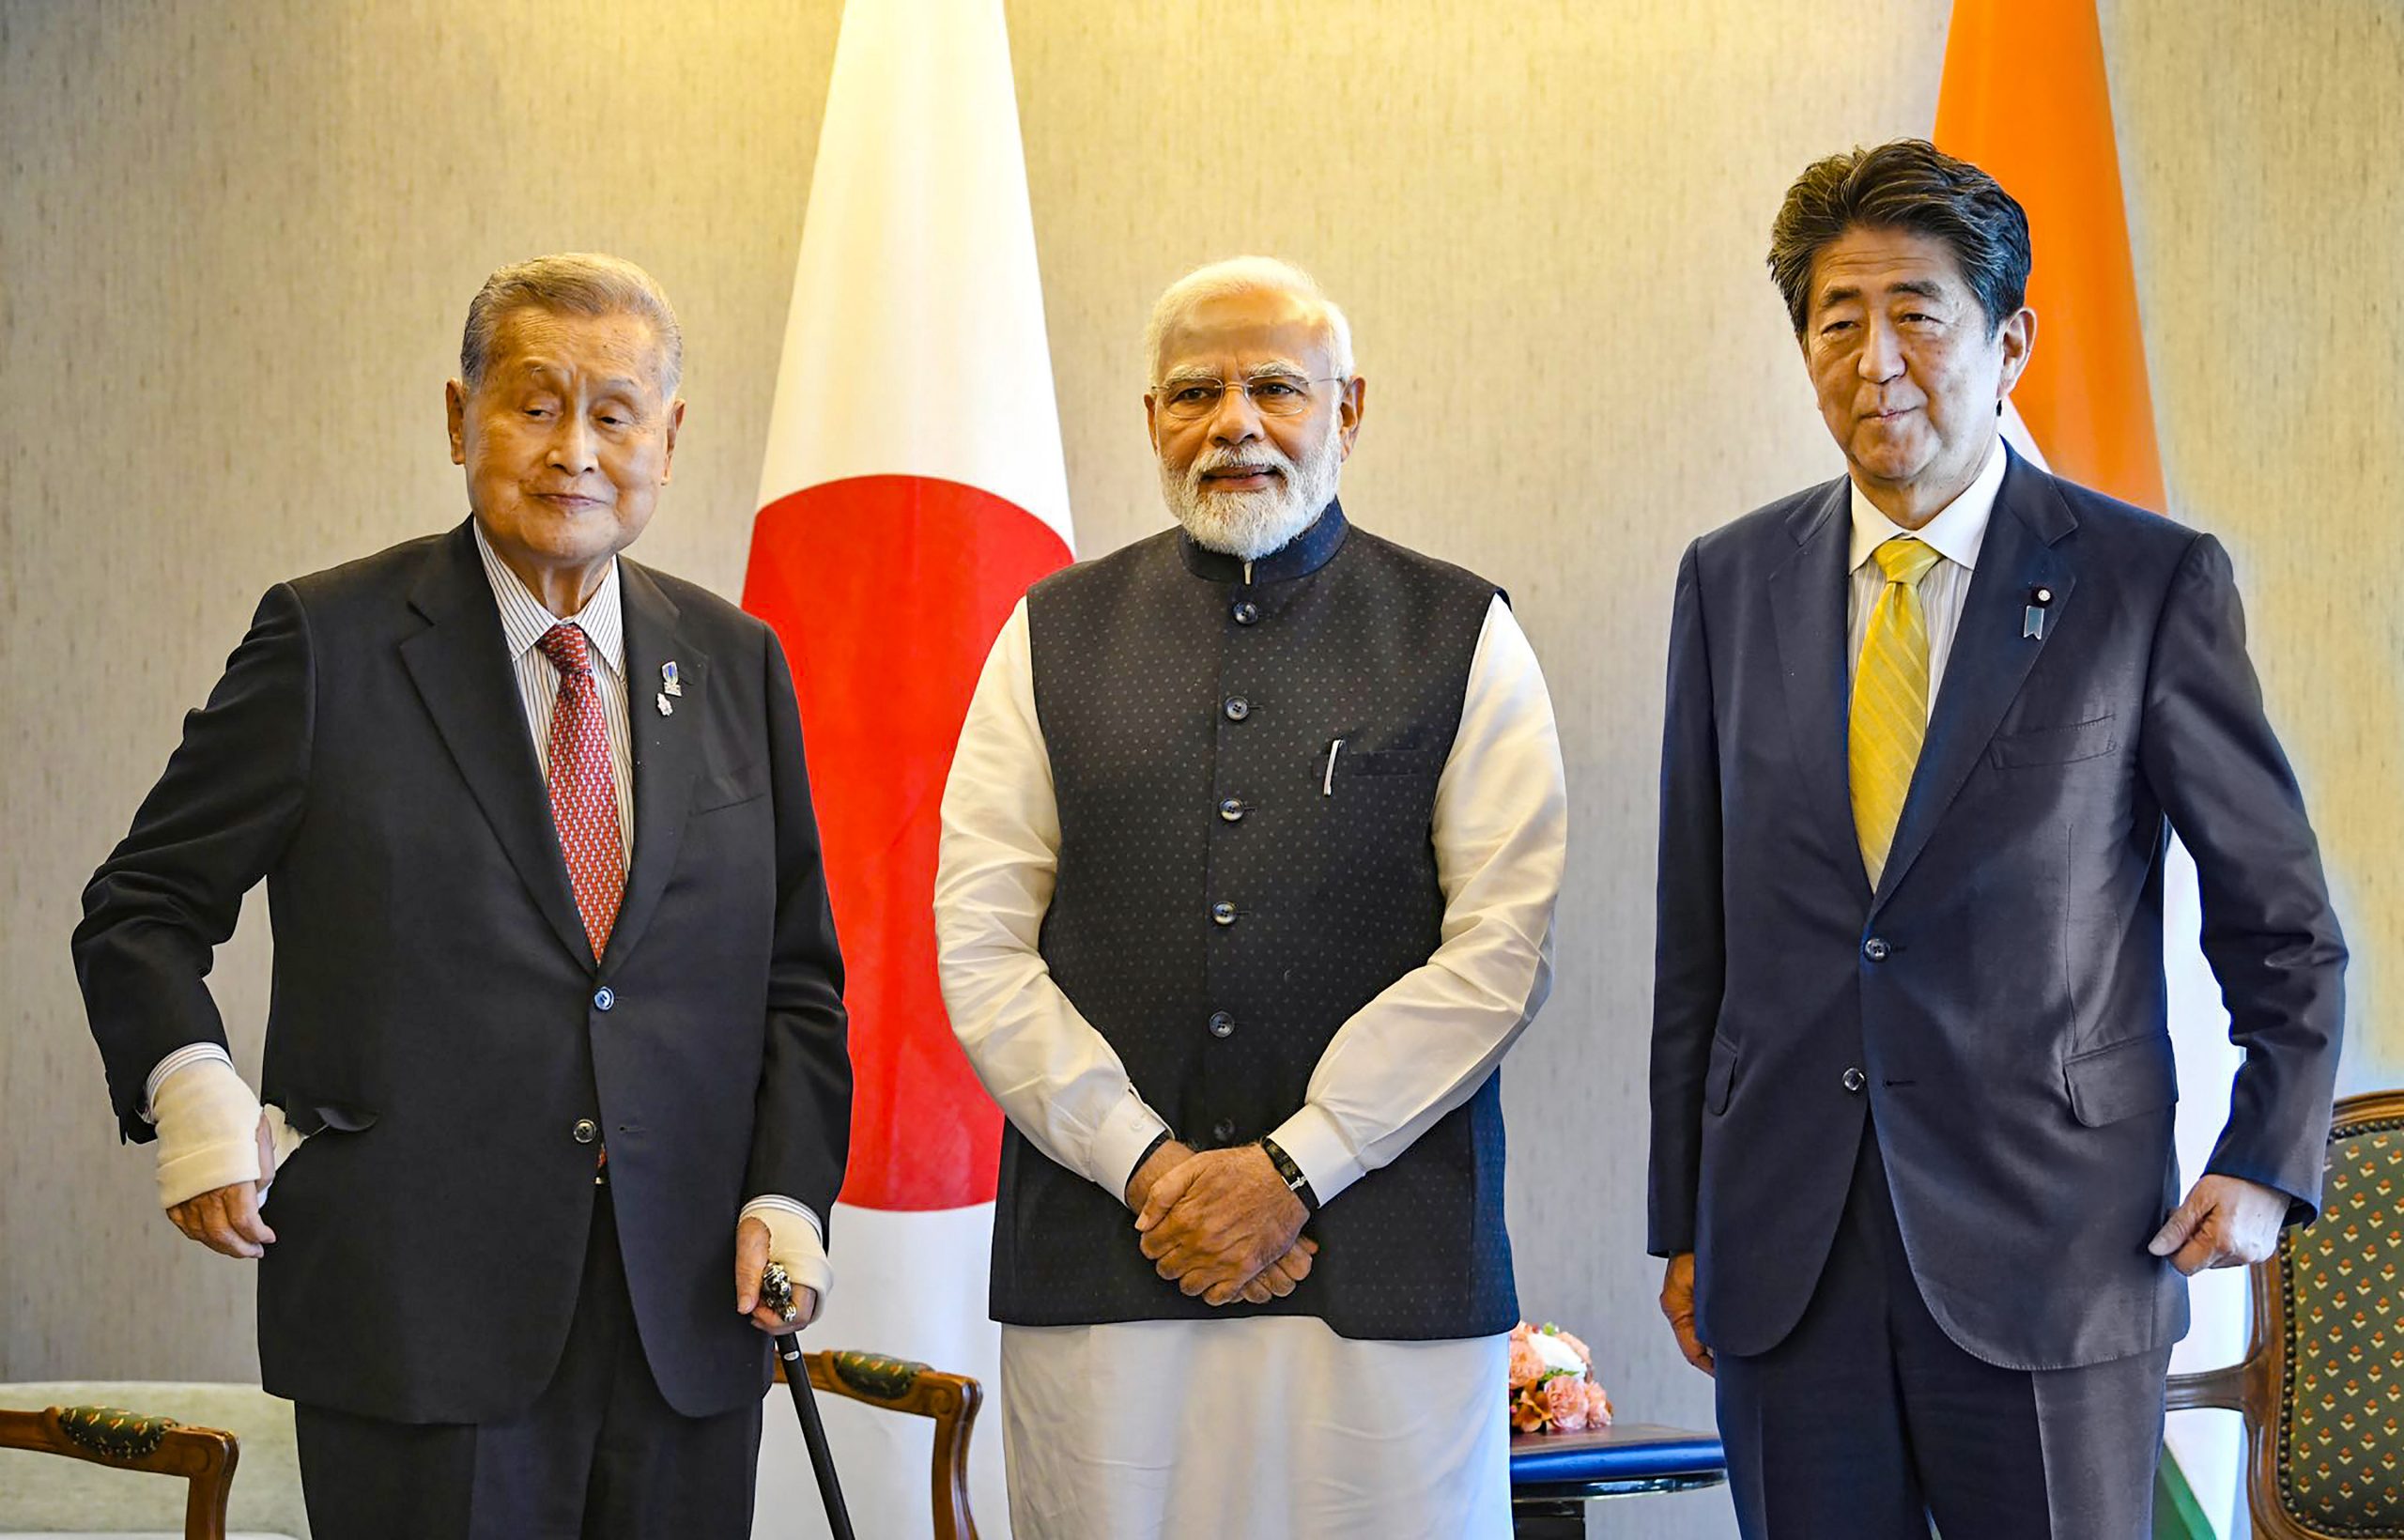 Shinzo Abe shooting: PM Modi deeply distressed by attack on ‘dear friend’